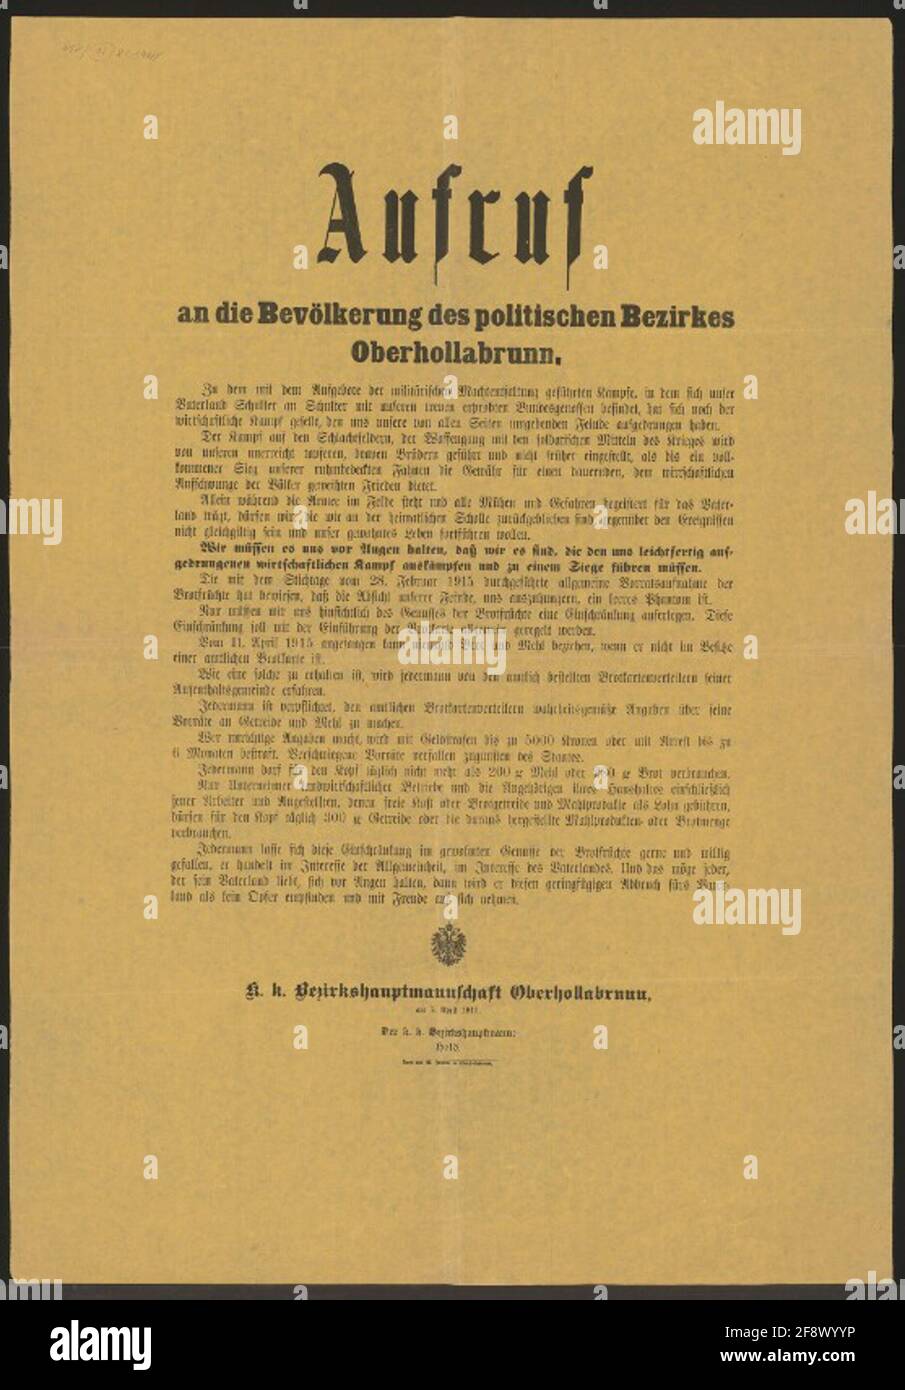 Introduction Bread Card - Call - Upper Hollabrunn Storage Recording of bread fruits - Introduction of the bread card with April 11, 1915 - misfeeds punishable - consumption per capita - K. K. District headquarters Oberhollabrunn on April 5, 1915 - The K. k. District Hauptmann: Hero Stock Photo